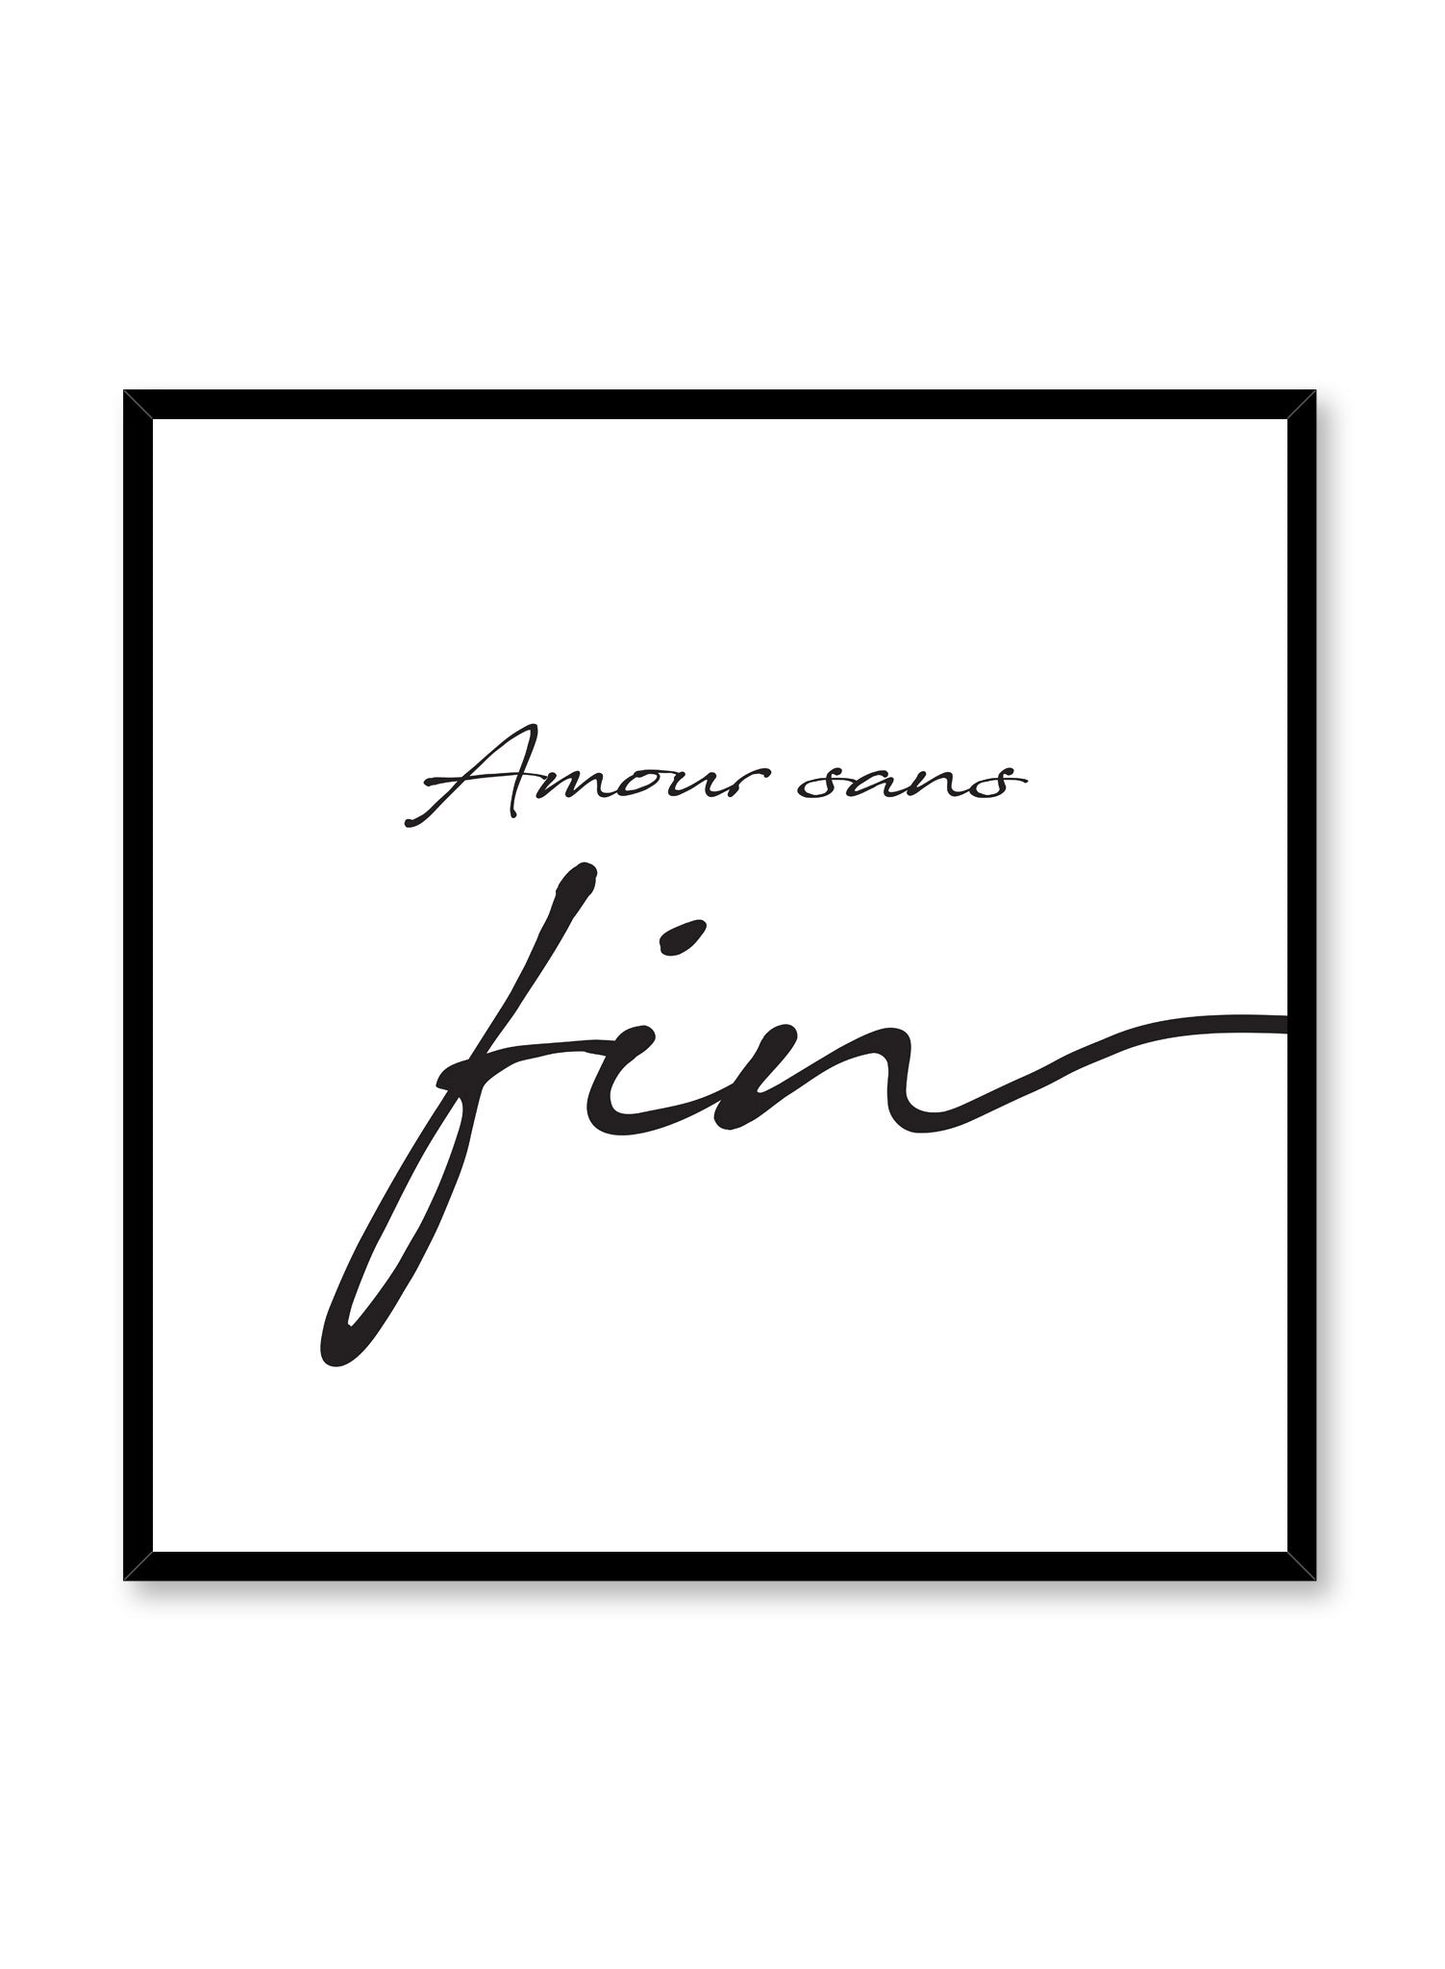 Amour sans fin minimalist art print by Opposite Wall in square format